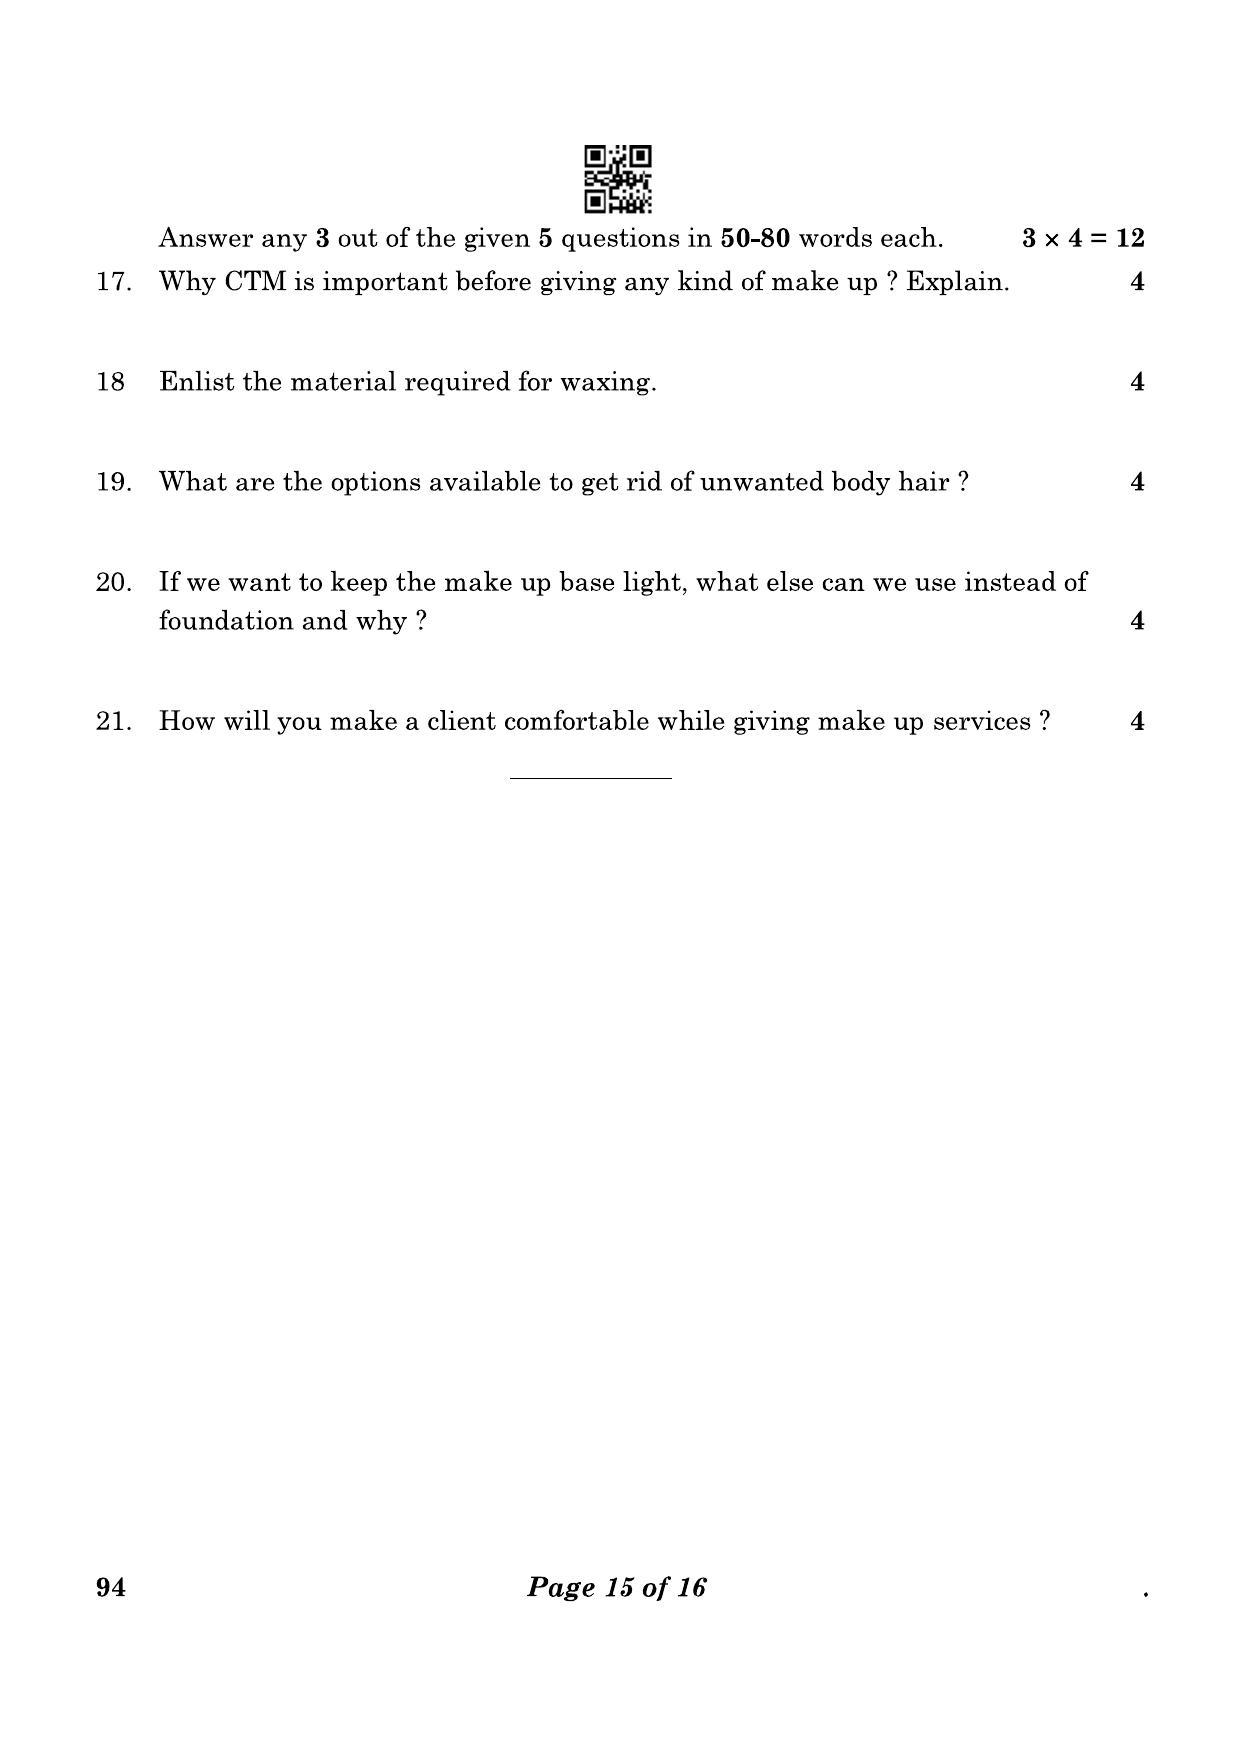 CBSE Class 10 94 Beauty And Wellness 2023 Question Paper - Page 15